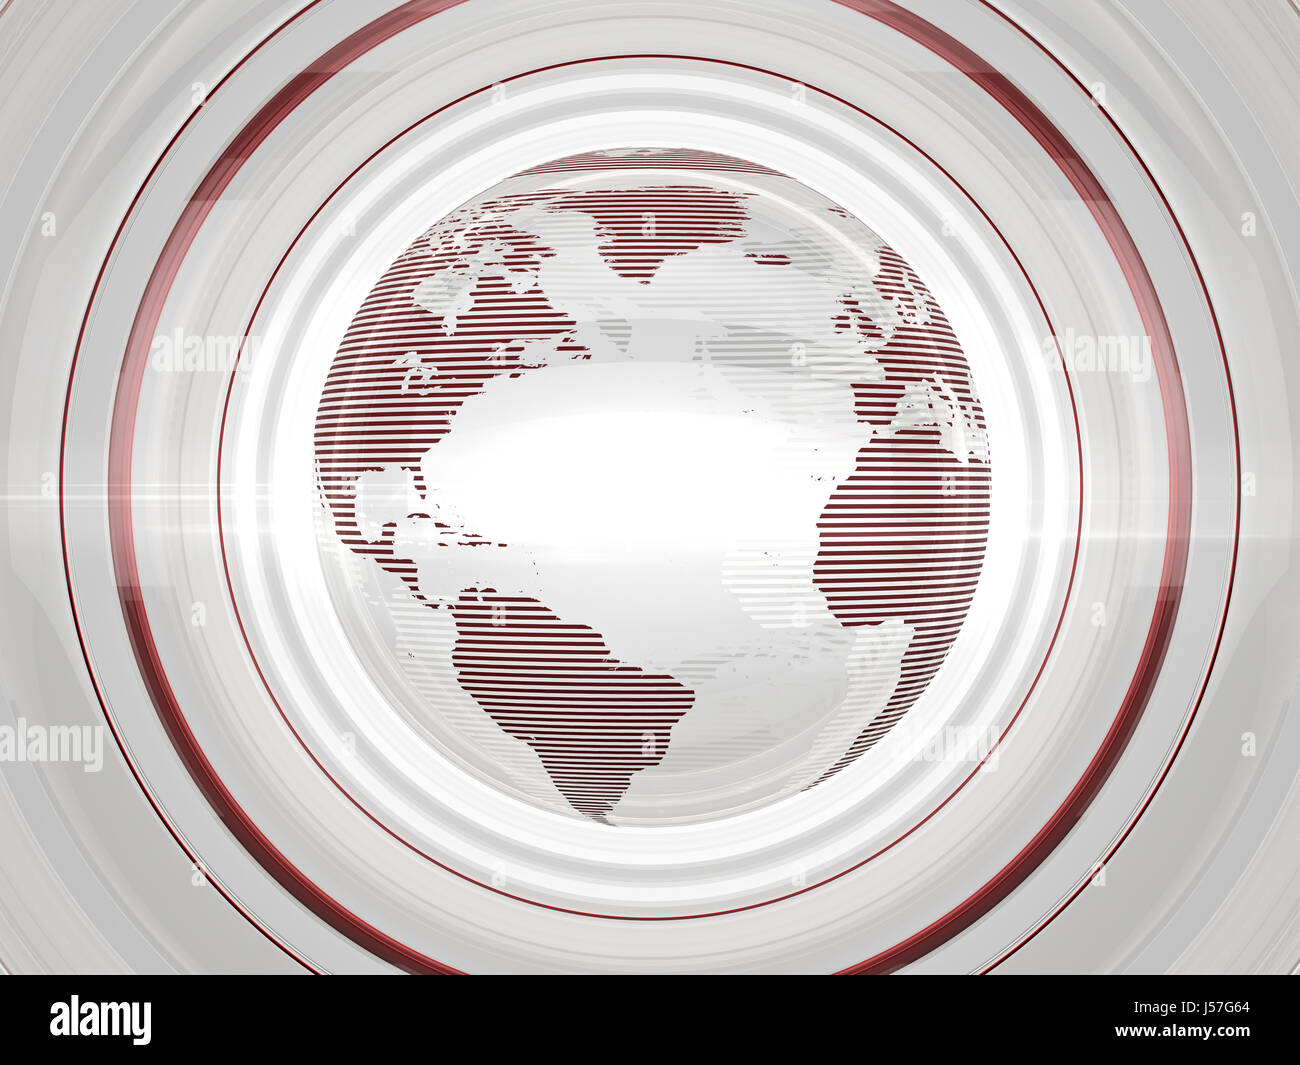 White Glossy Globe and World Map with Red Stripe Pattern Stock Photo